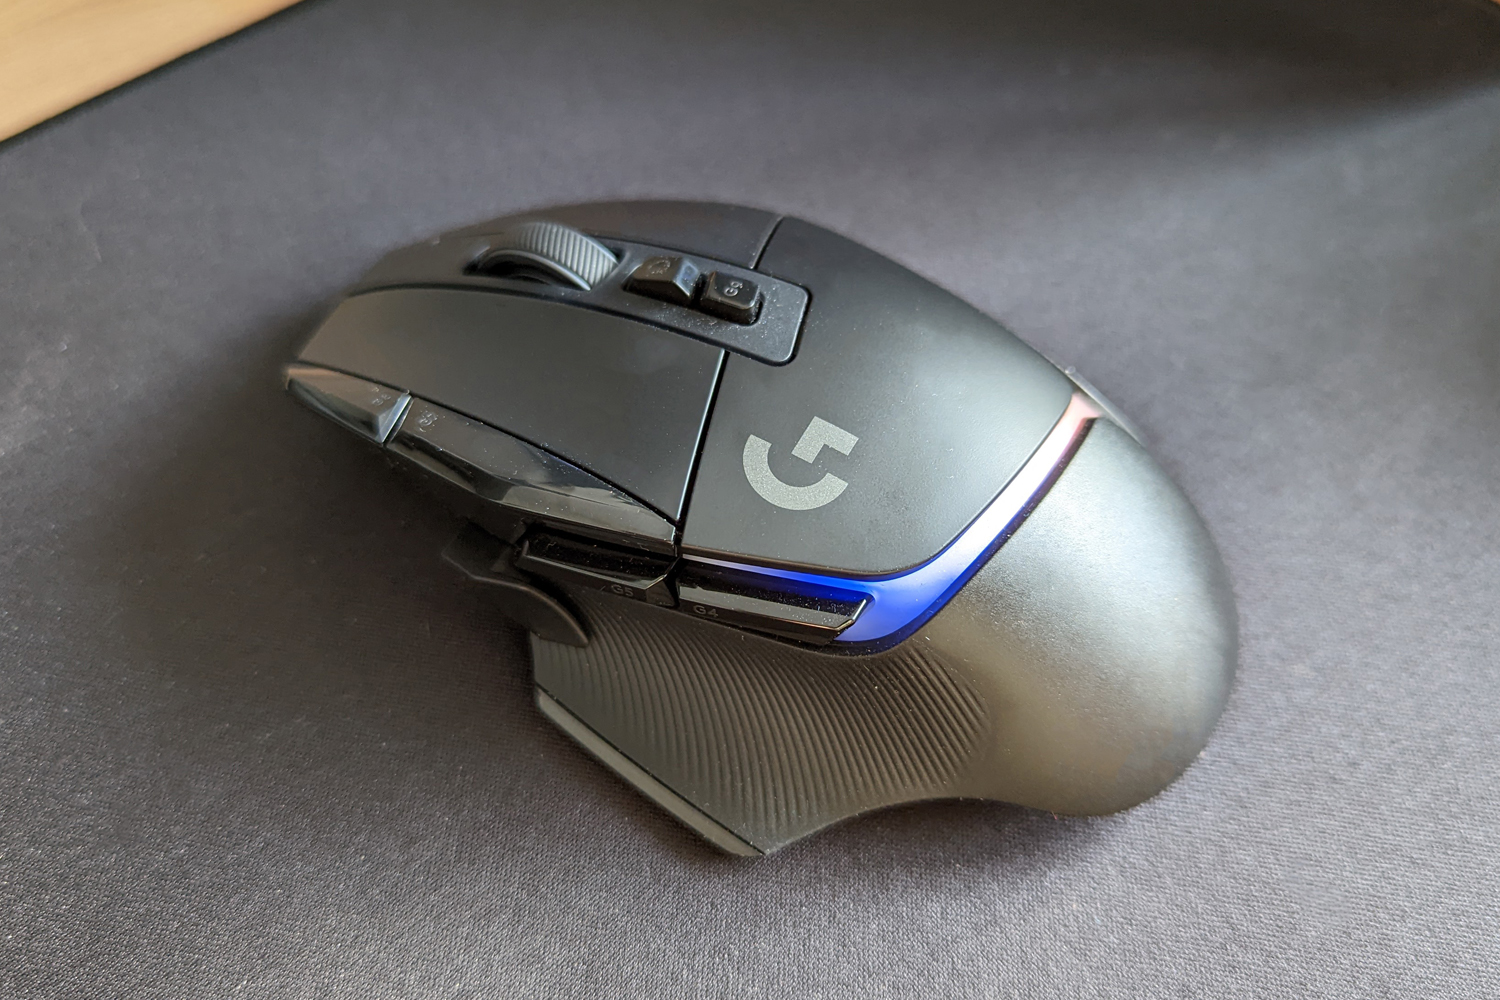 Logitech G502 Hero vs Logitech G502 X: What is the difference?